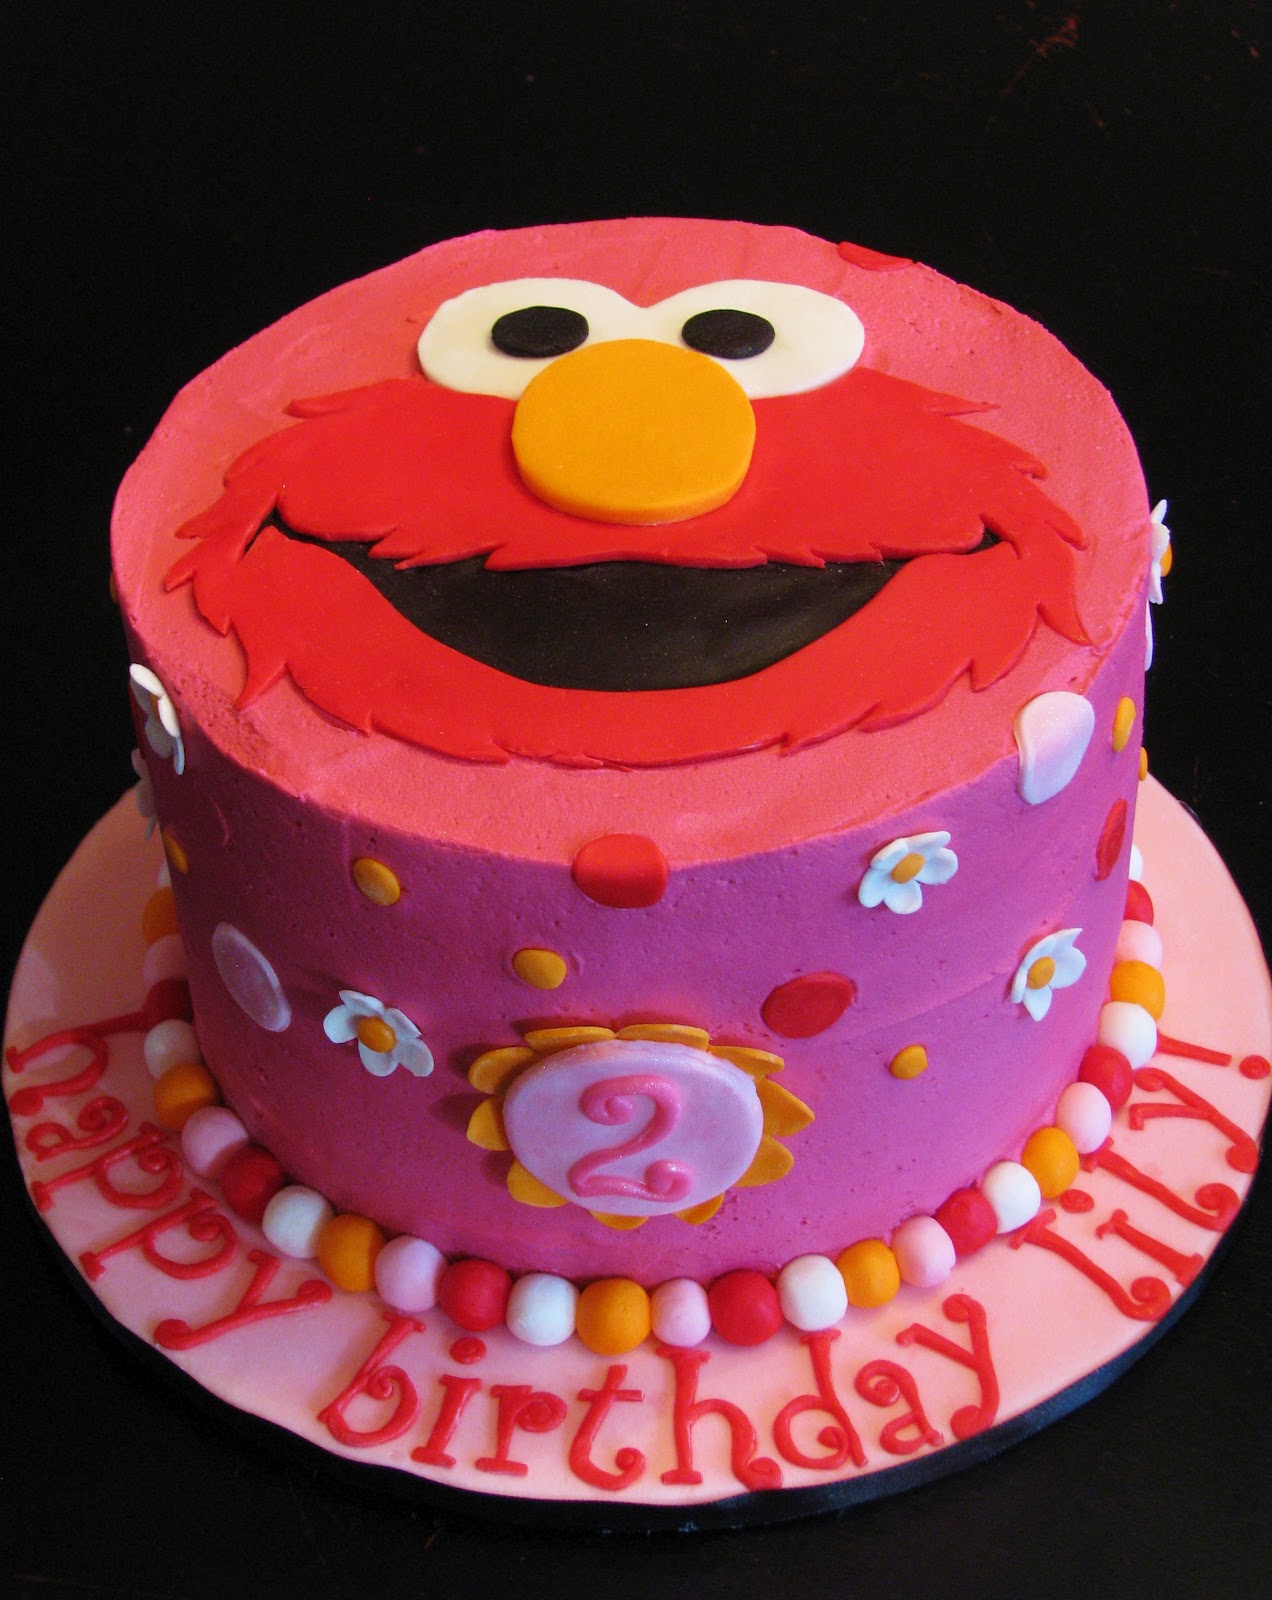 Bliss Cakes of London: Elmo in Pink!